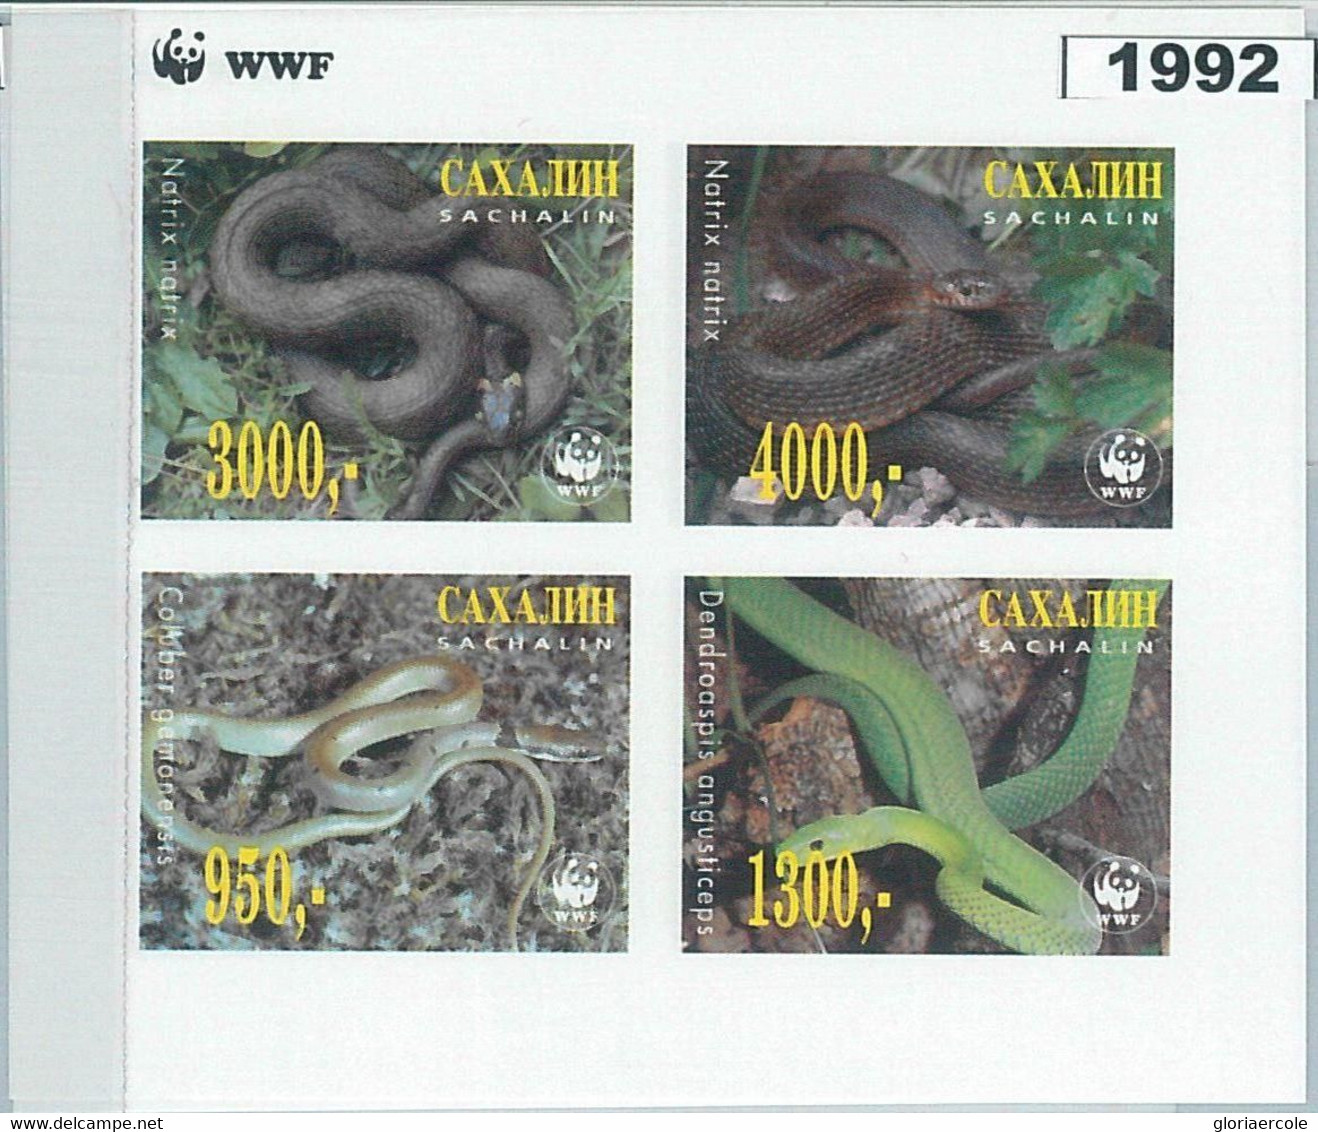 M1992 - RUSSIAN STATE, IMPERF SHEET: WWF, Snakes, Reptiles  R04.22 - Used Stamps